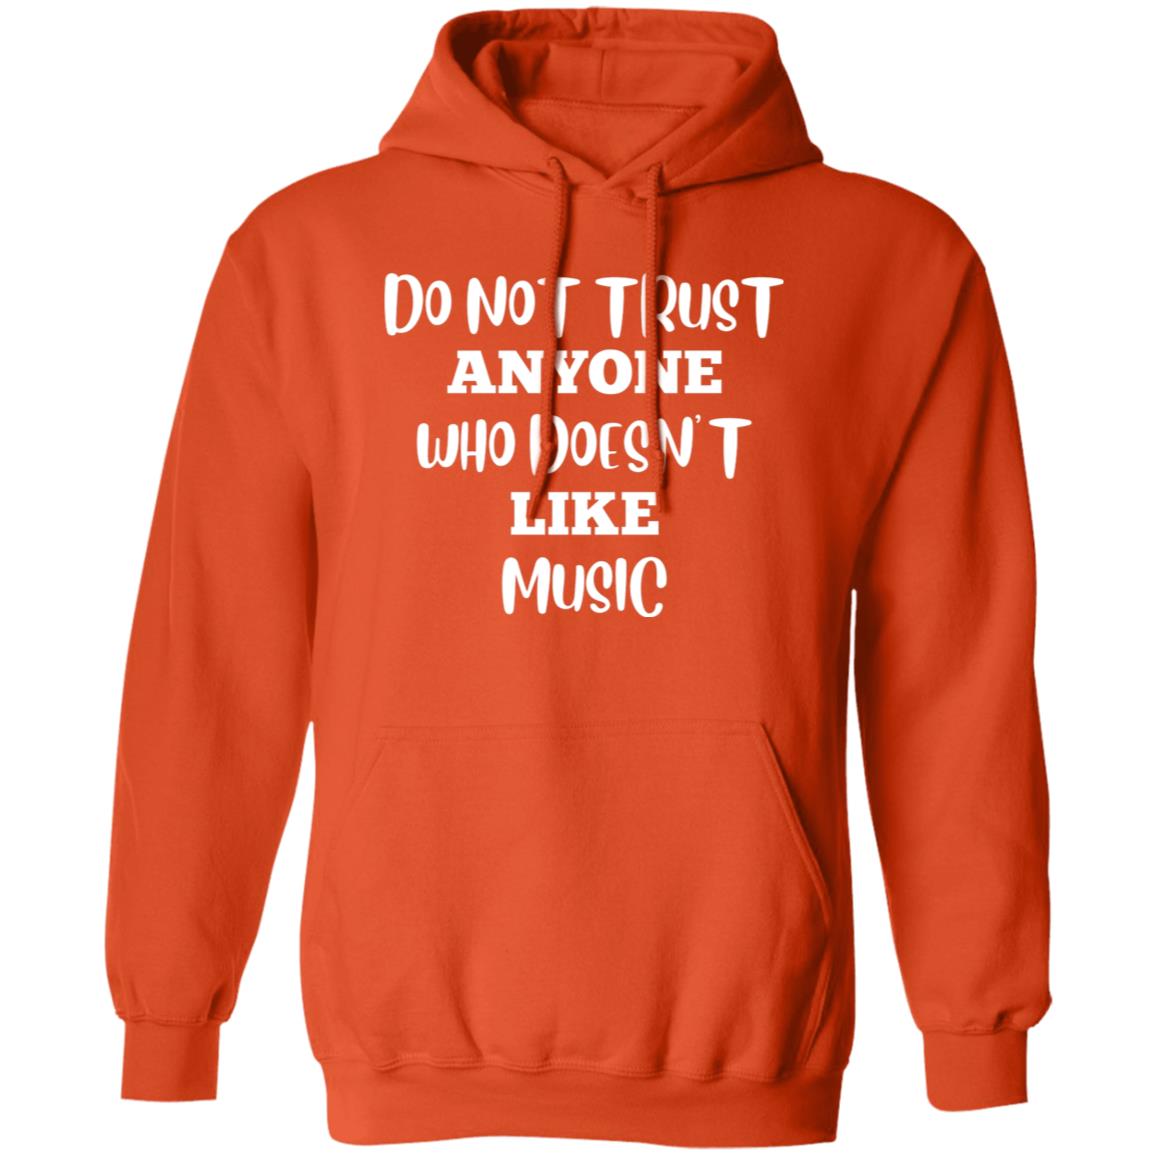 Do Not Trust Anyone Who Doesn't Like Music Hoodie